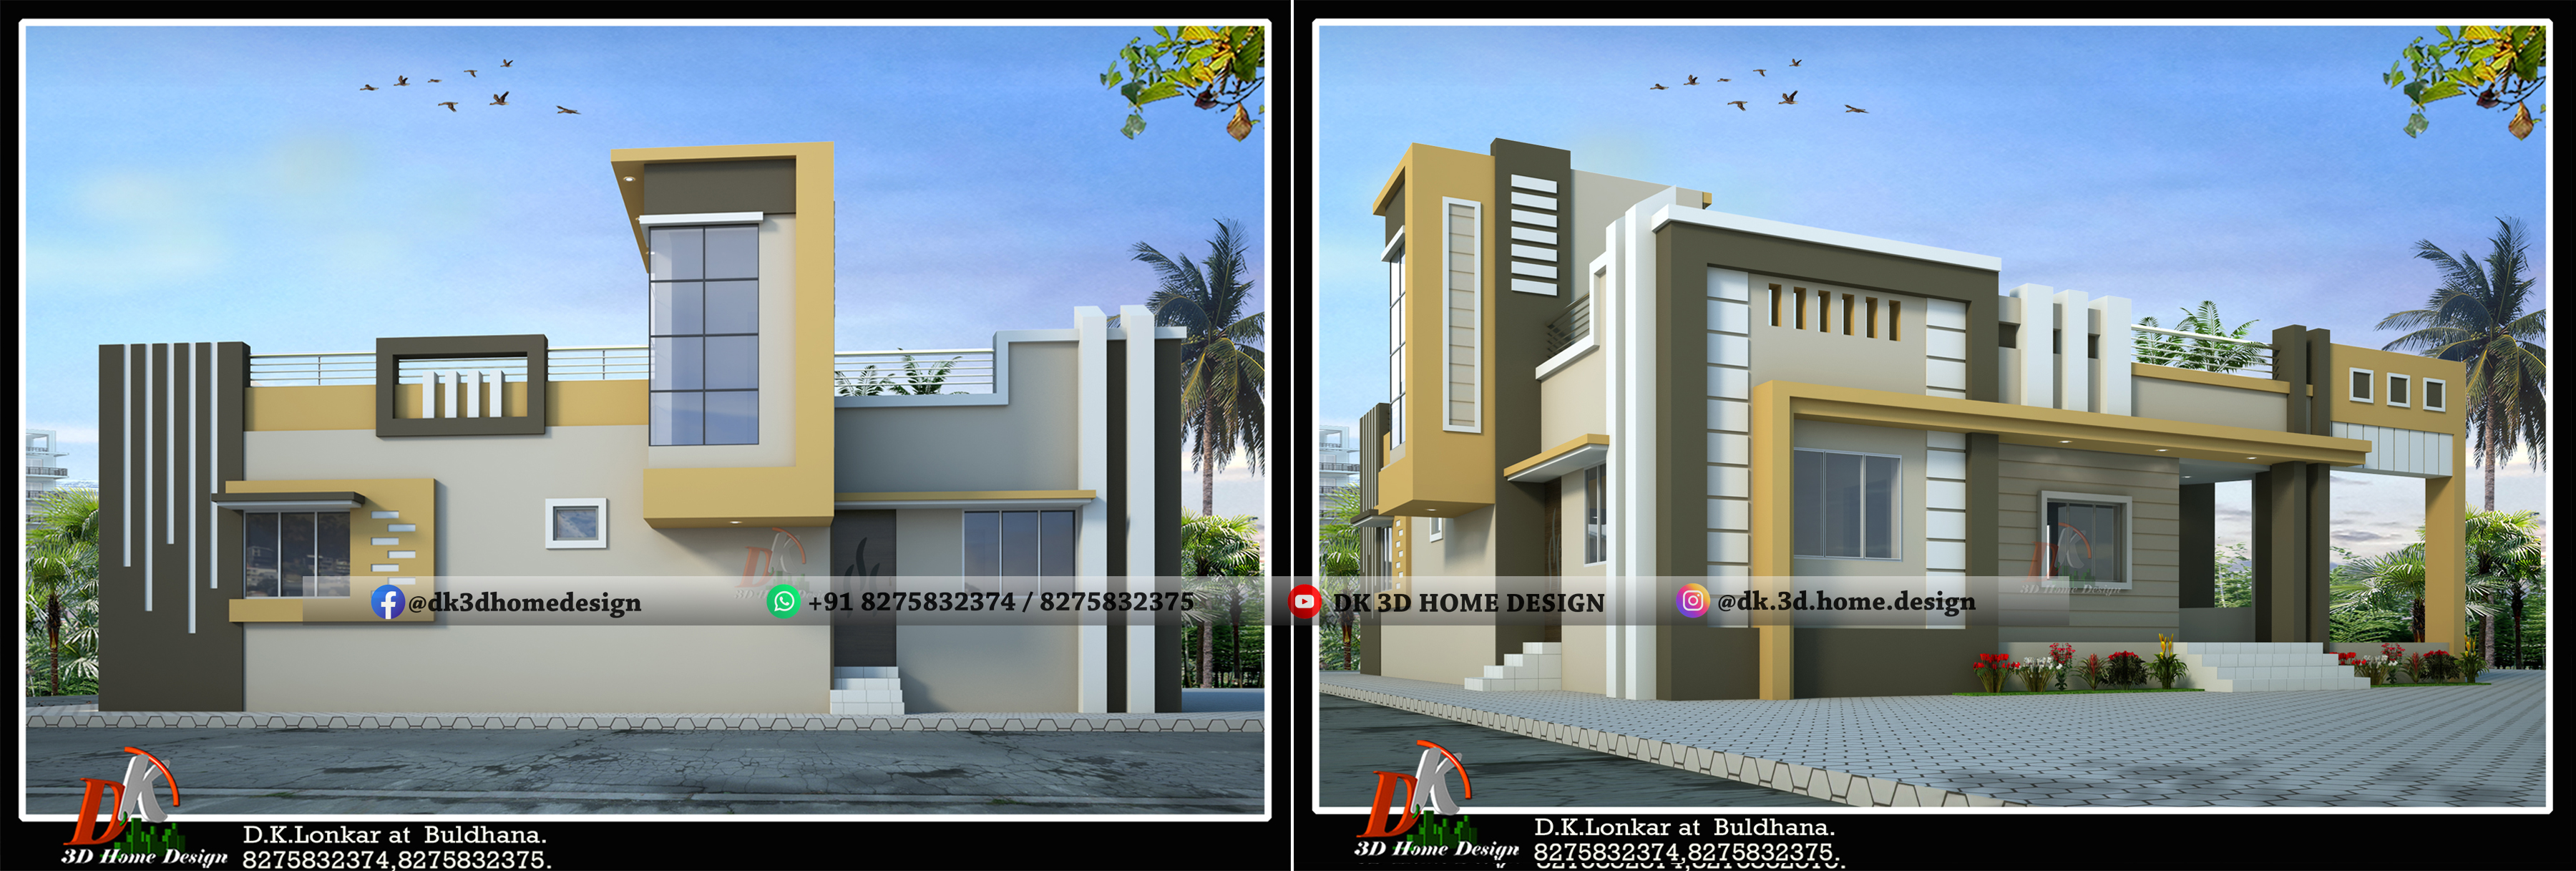 2000 square feet house front elevation design 2bhk